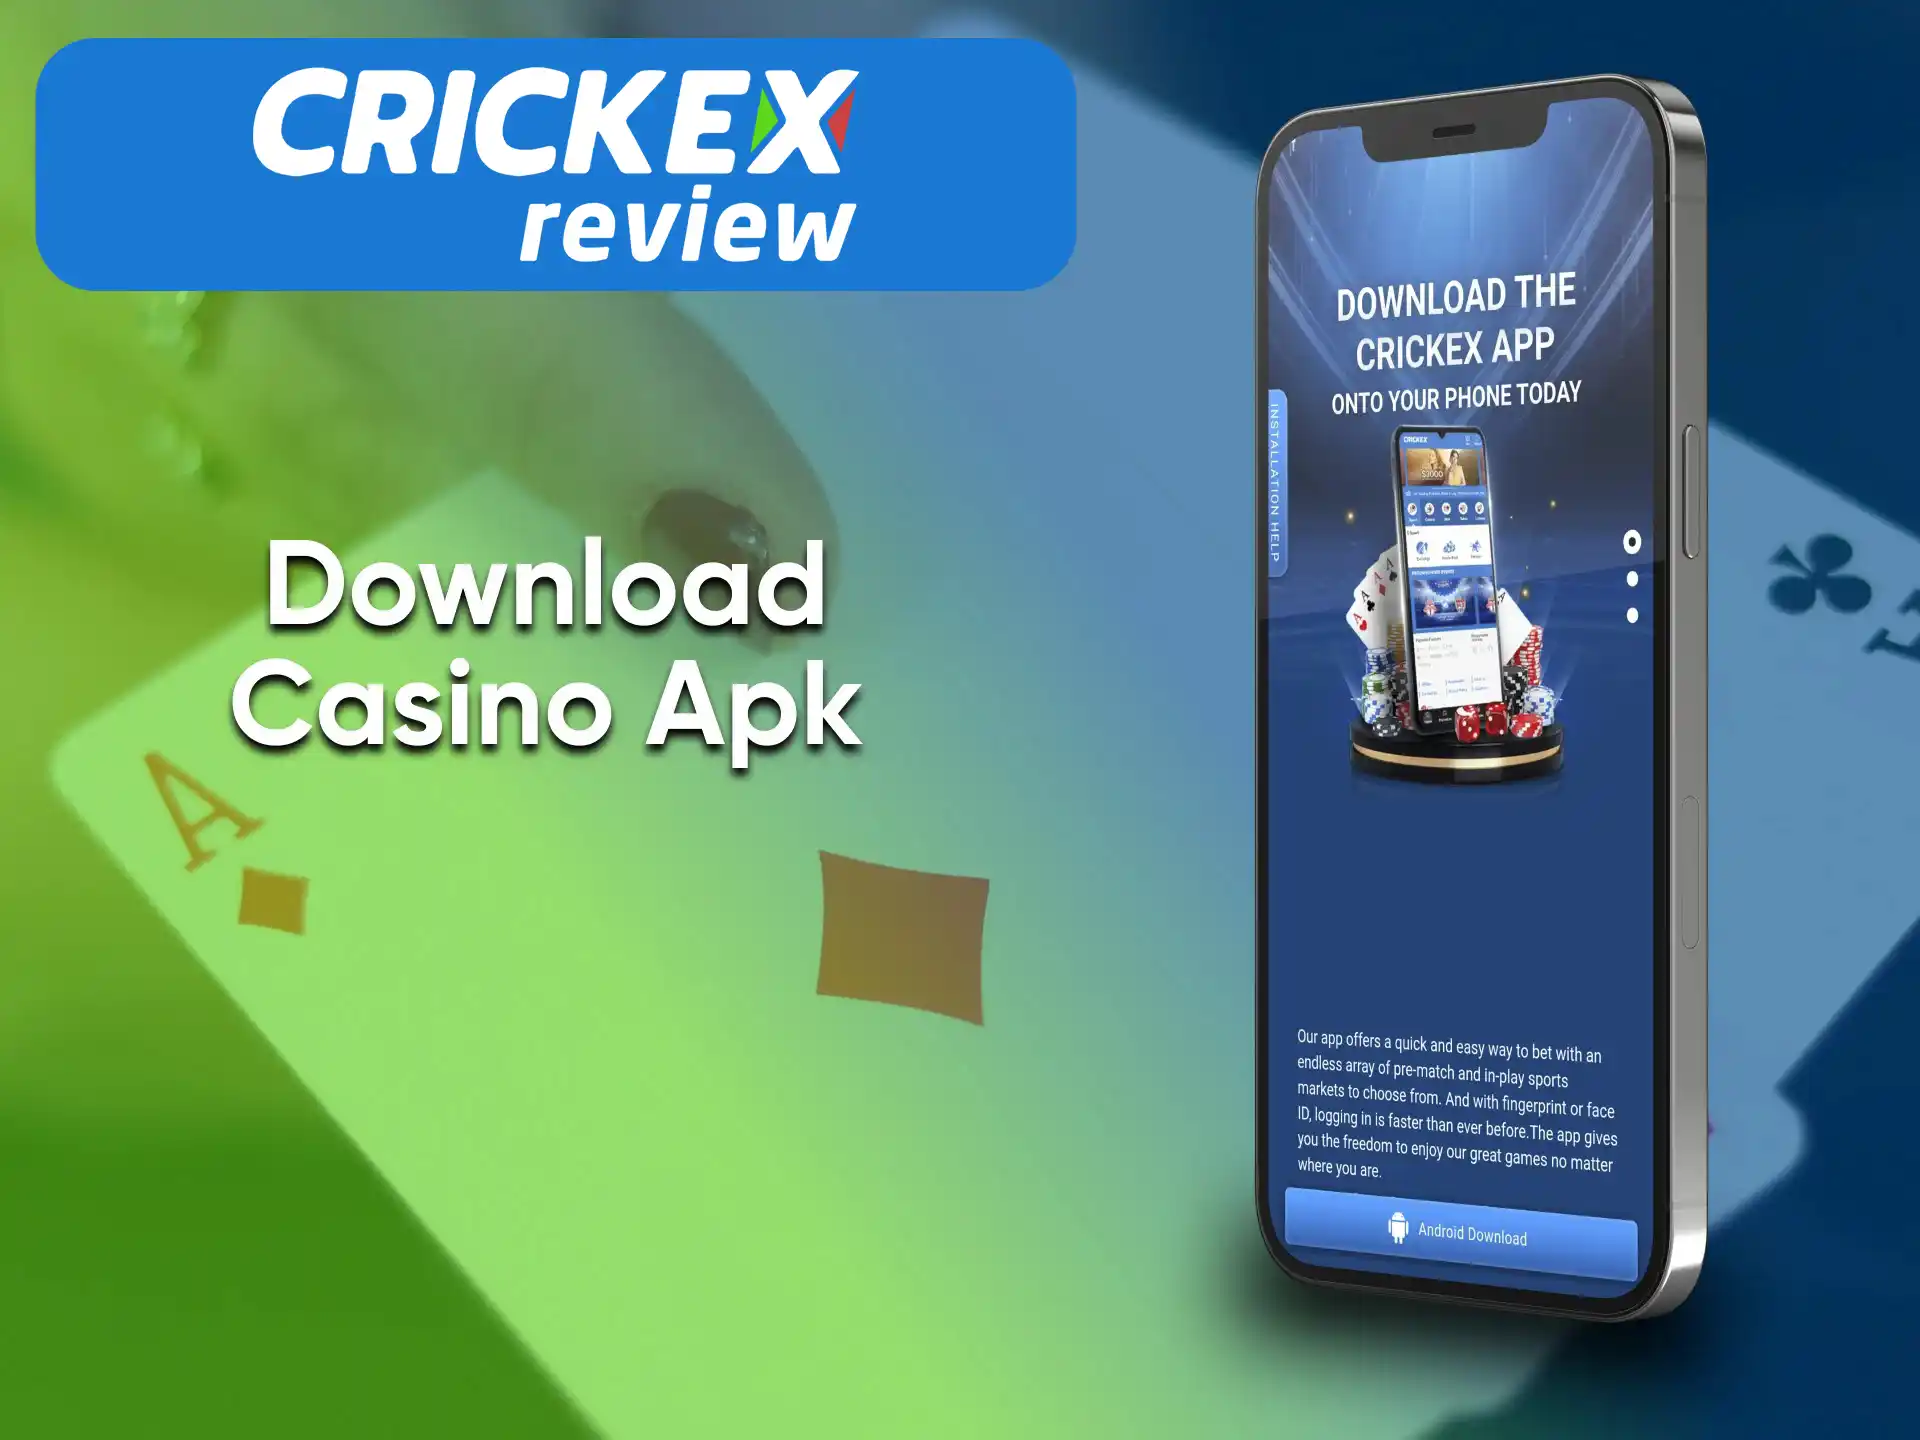 For Crickex casino games you can use your phone.